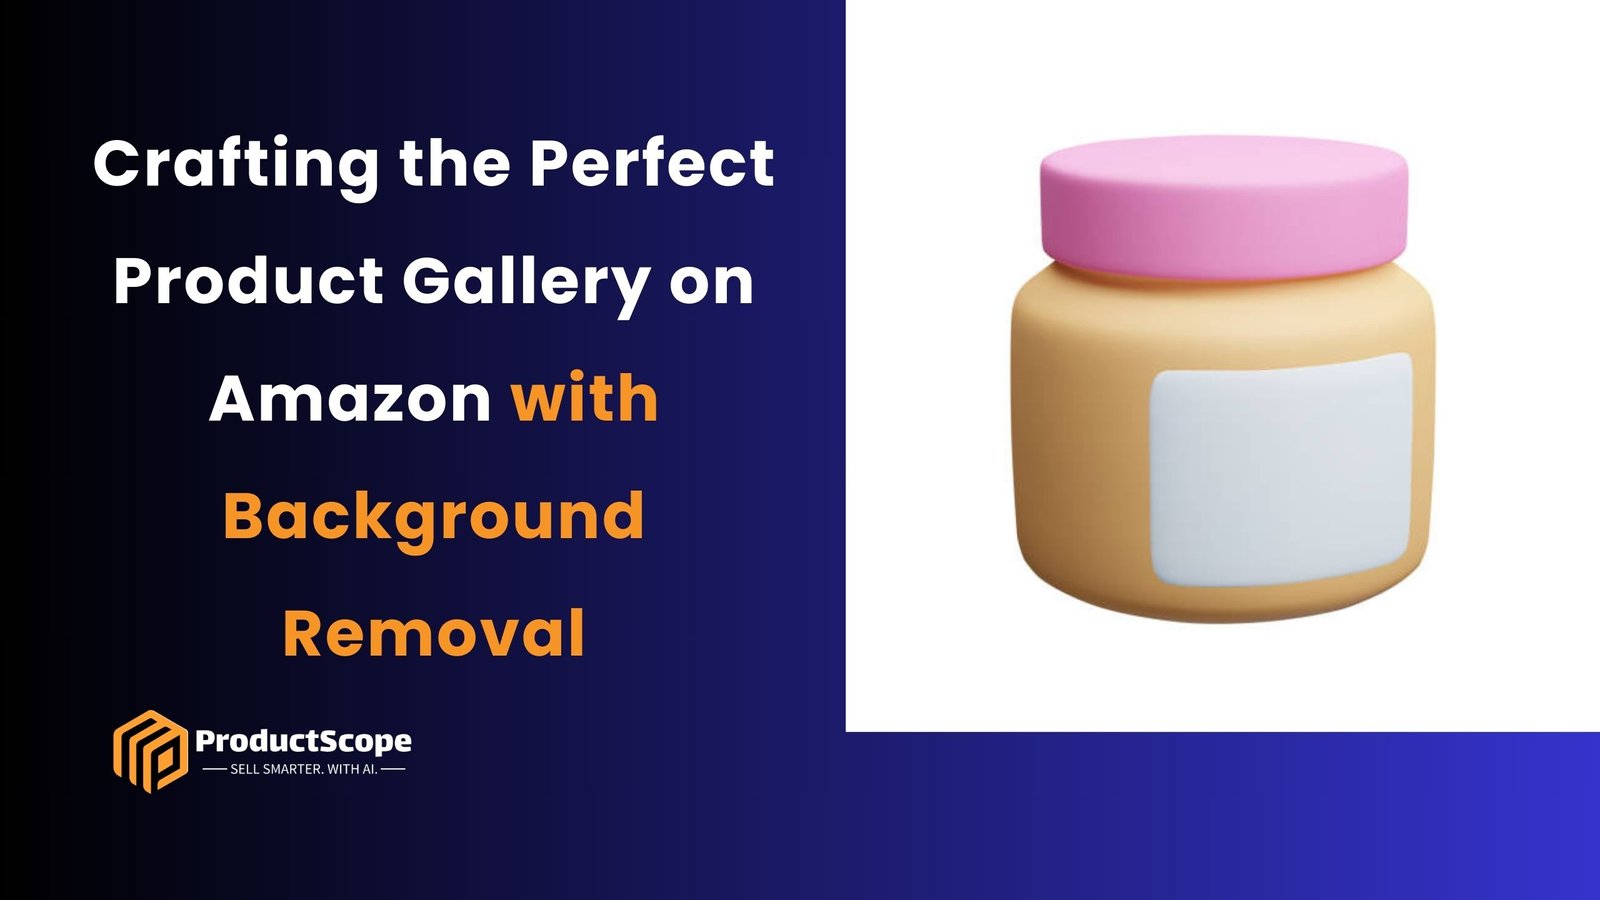 Crafting the Perfect Product Gallery on Amazon with Background Removal